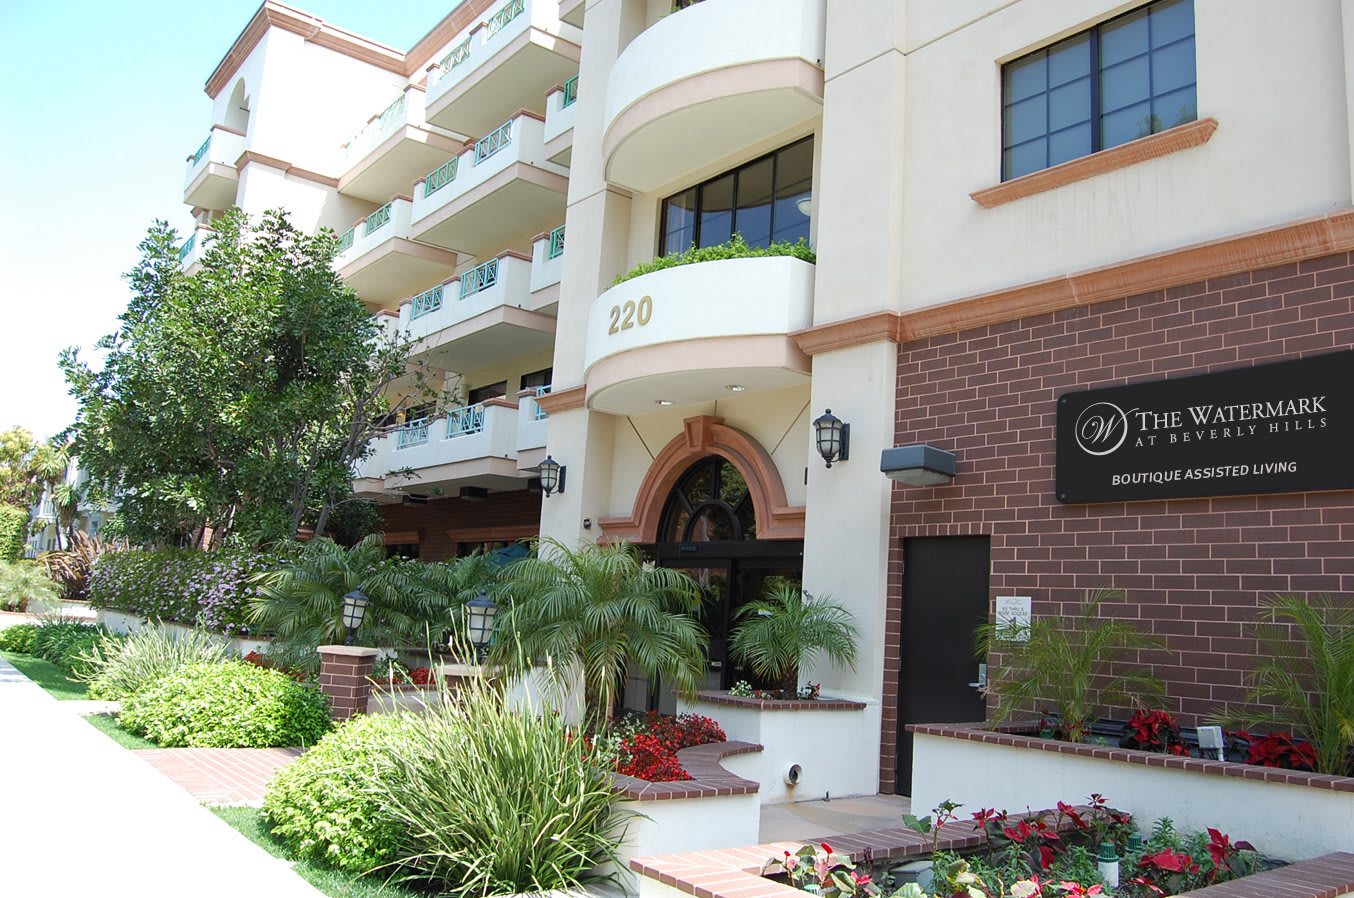 The Watermark at Beverly Hills community exterior